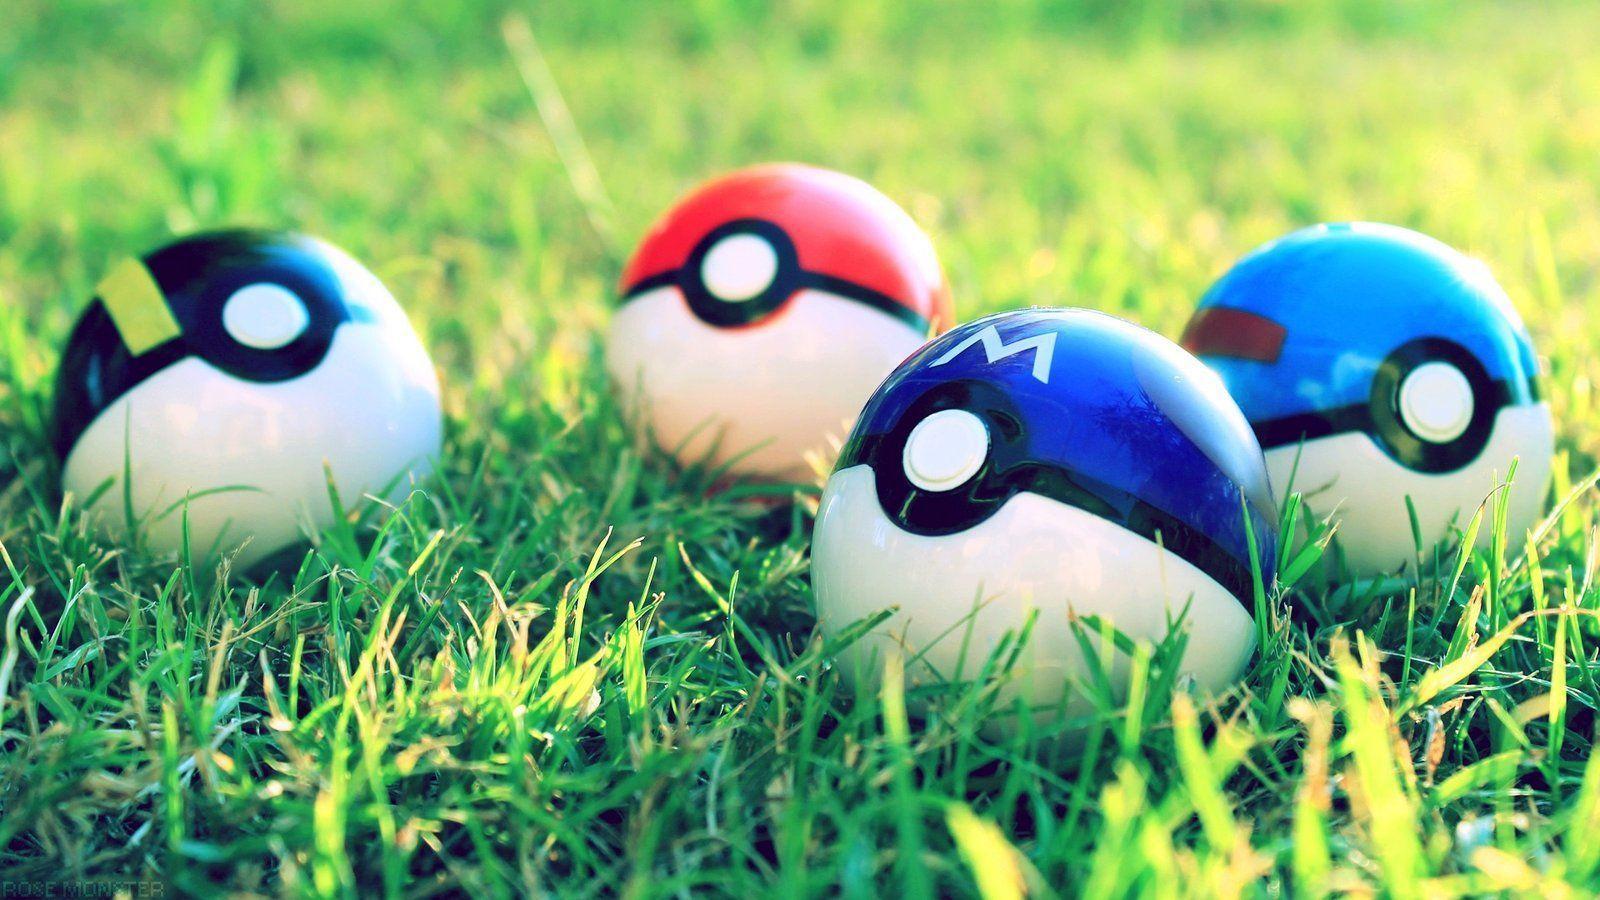 Wallpapers For > Pokeball Wallpapers Android